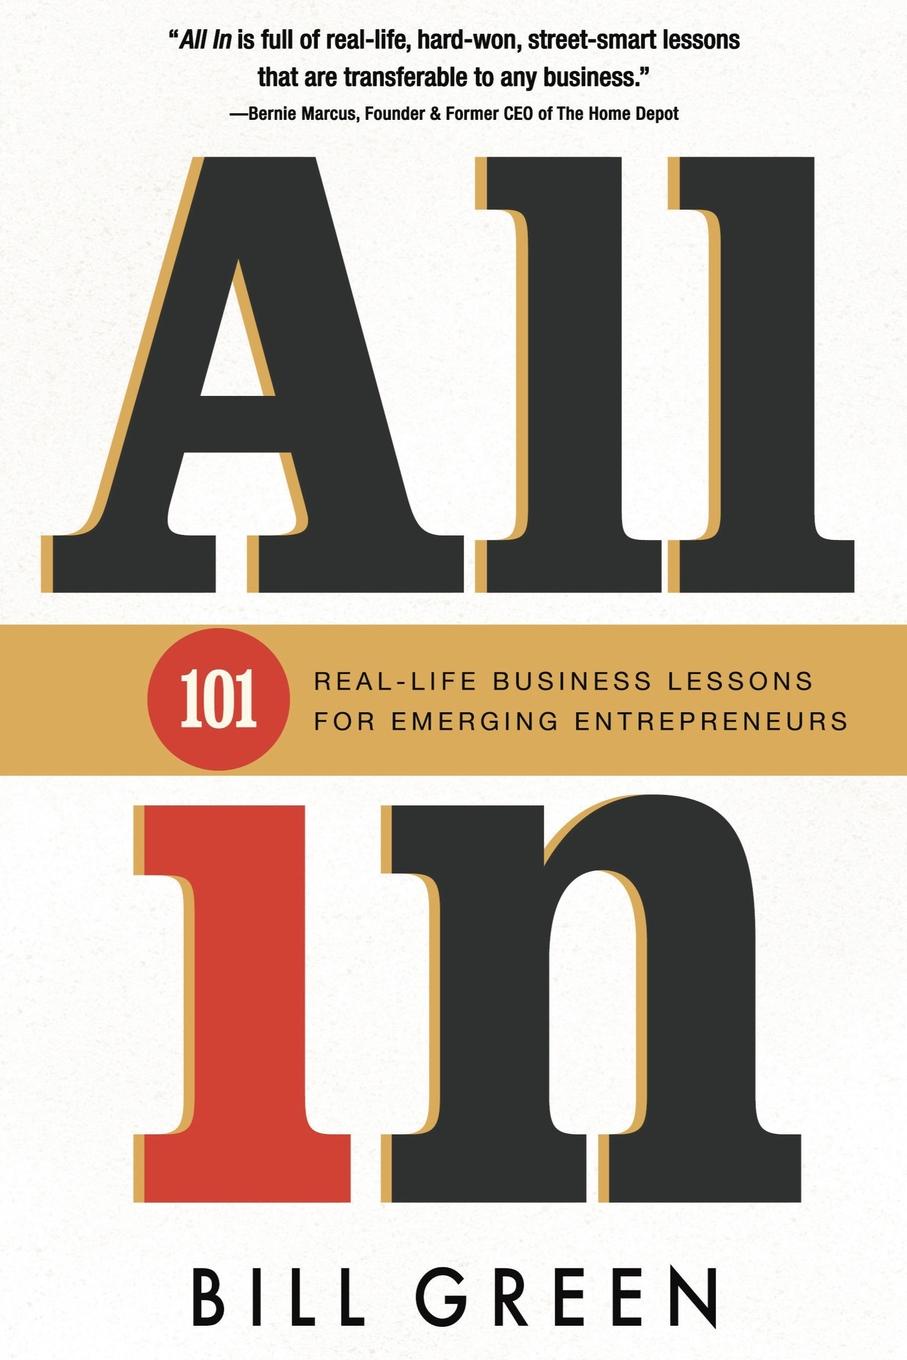 ALL IN. 101 Real Life Business Lessons For Emerging Entrepreneurs